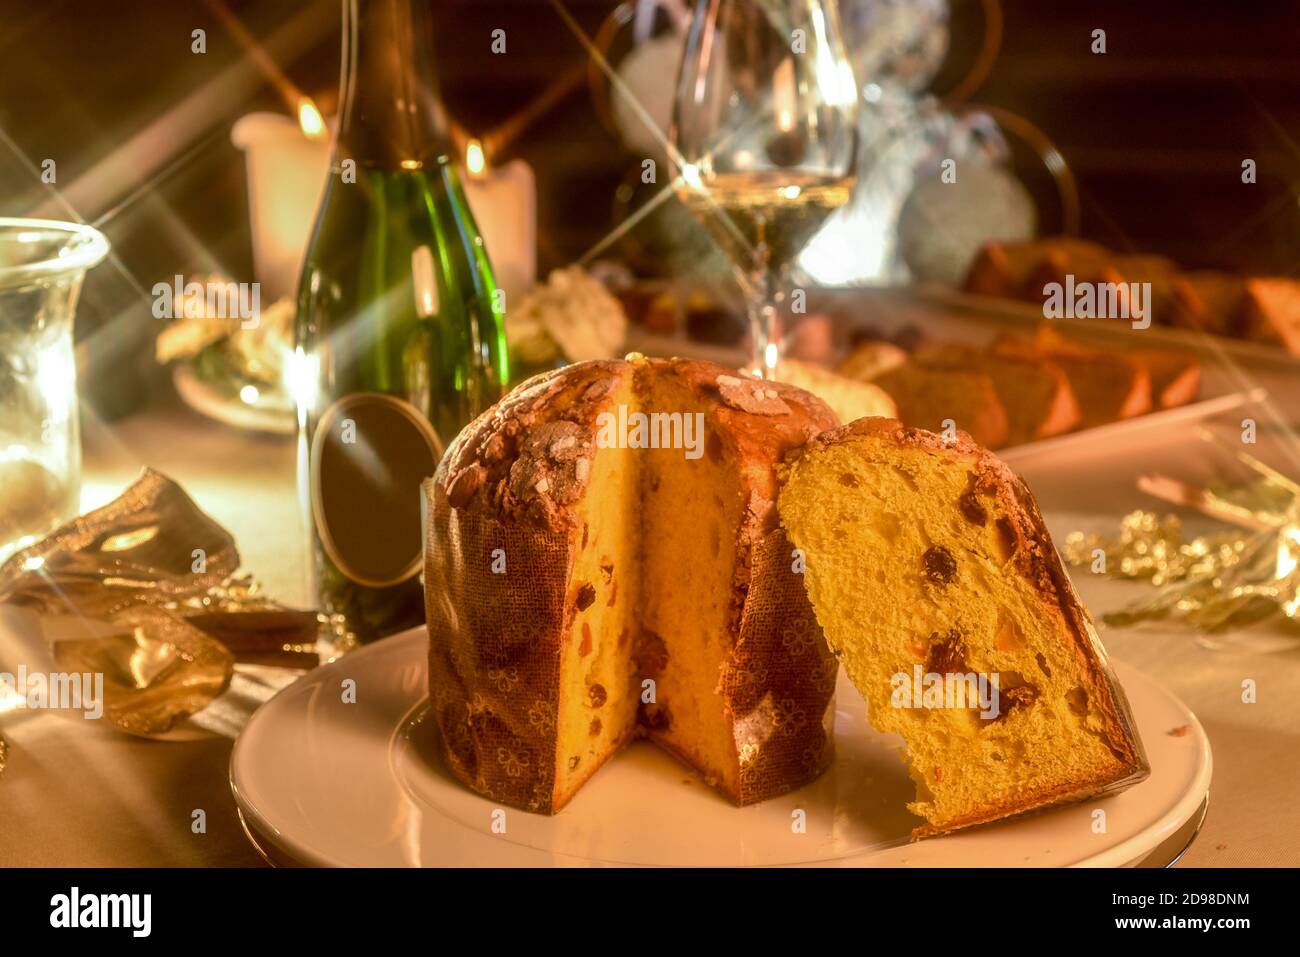 panettone on table set in Christmas style, in the blurred background bottle and glass of champagne and candles Stock Photo